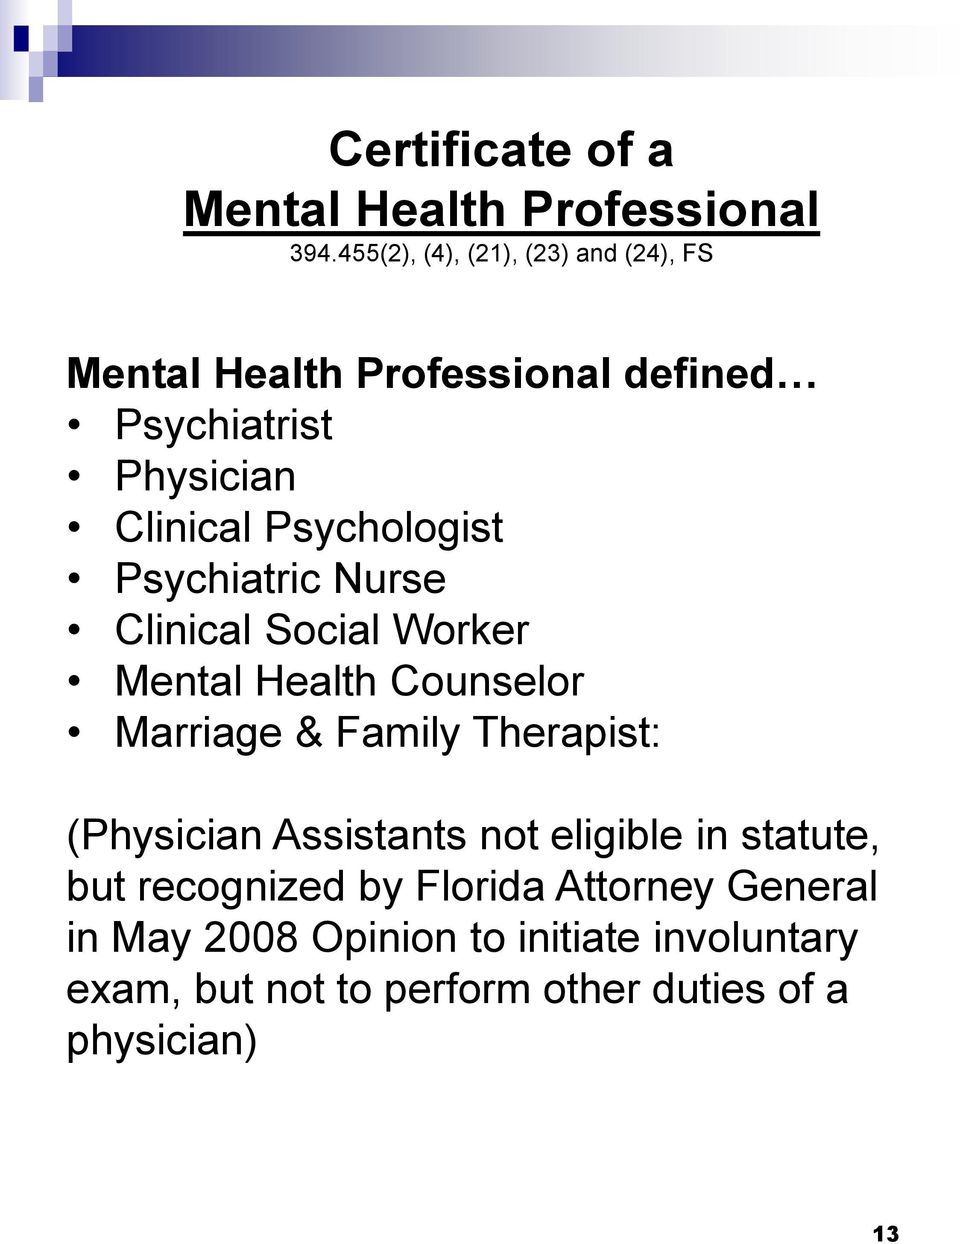 Psychologist Psychiatric Nurse Clinical Social Worker Mental Health Counselor Marriage & Family Therapist: